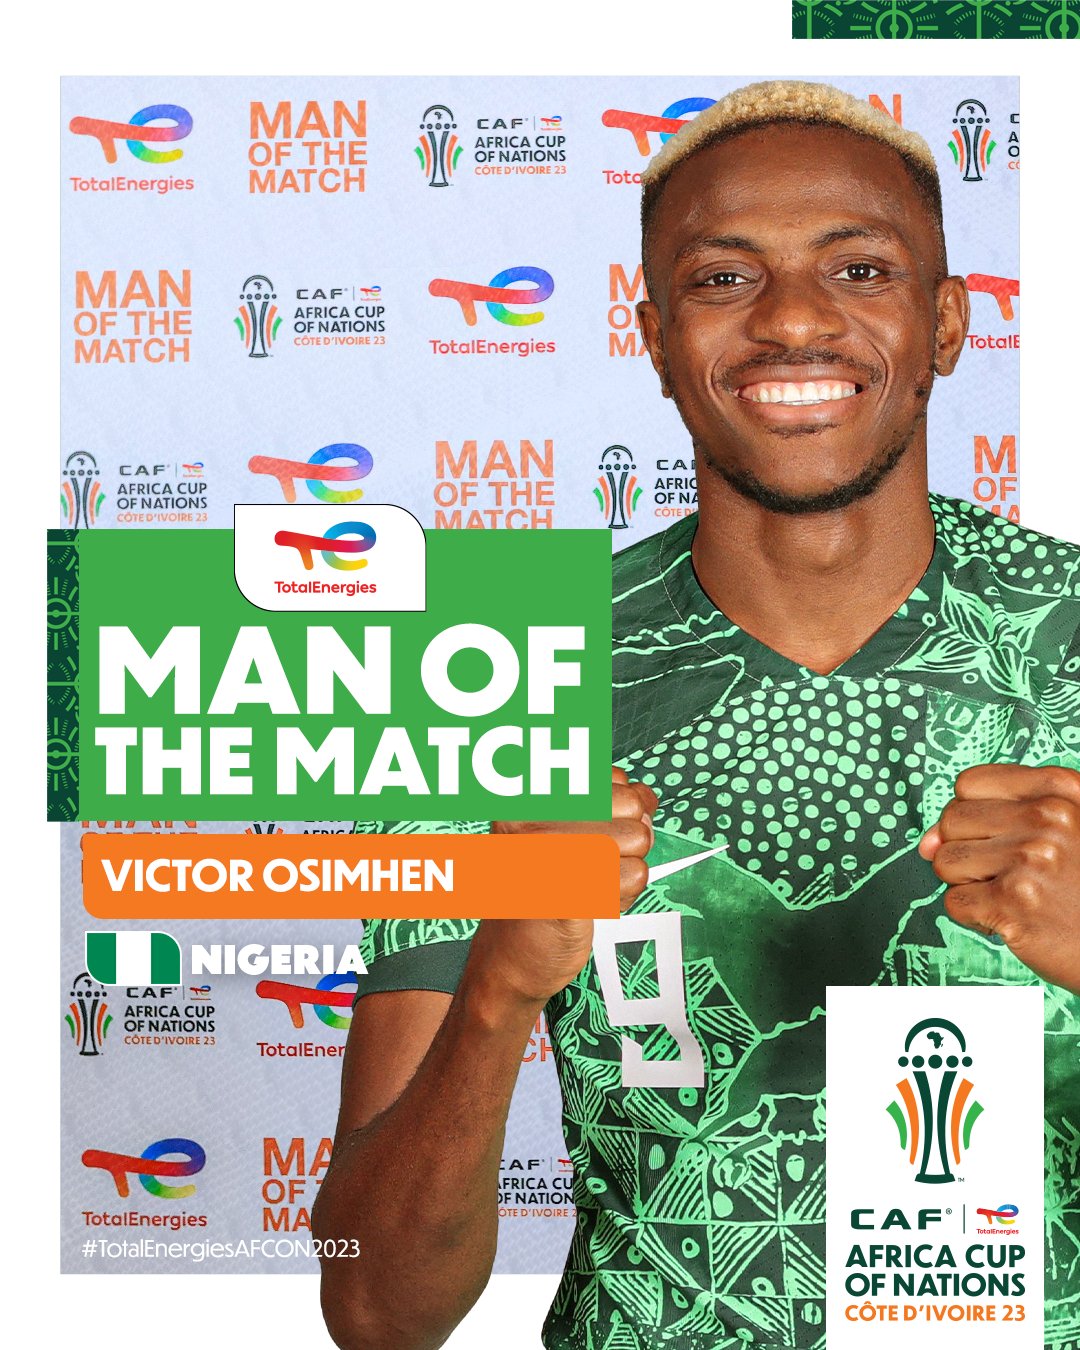 AFCON 2023: Victor Osimhen emerge Man of the match